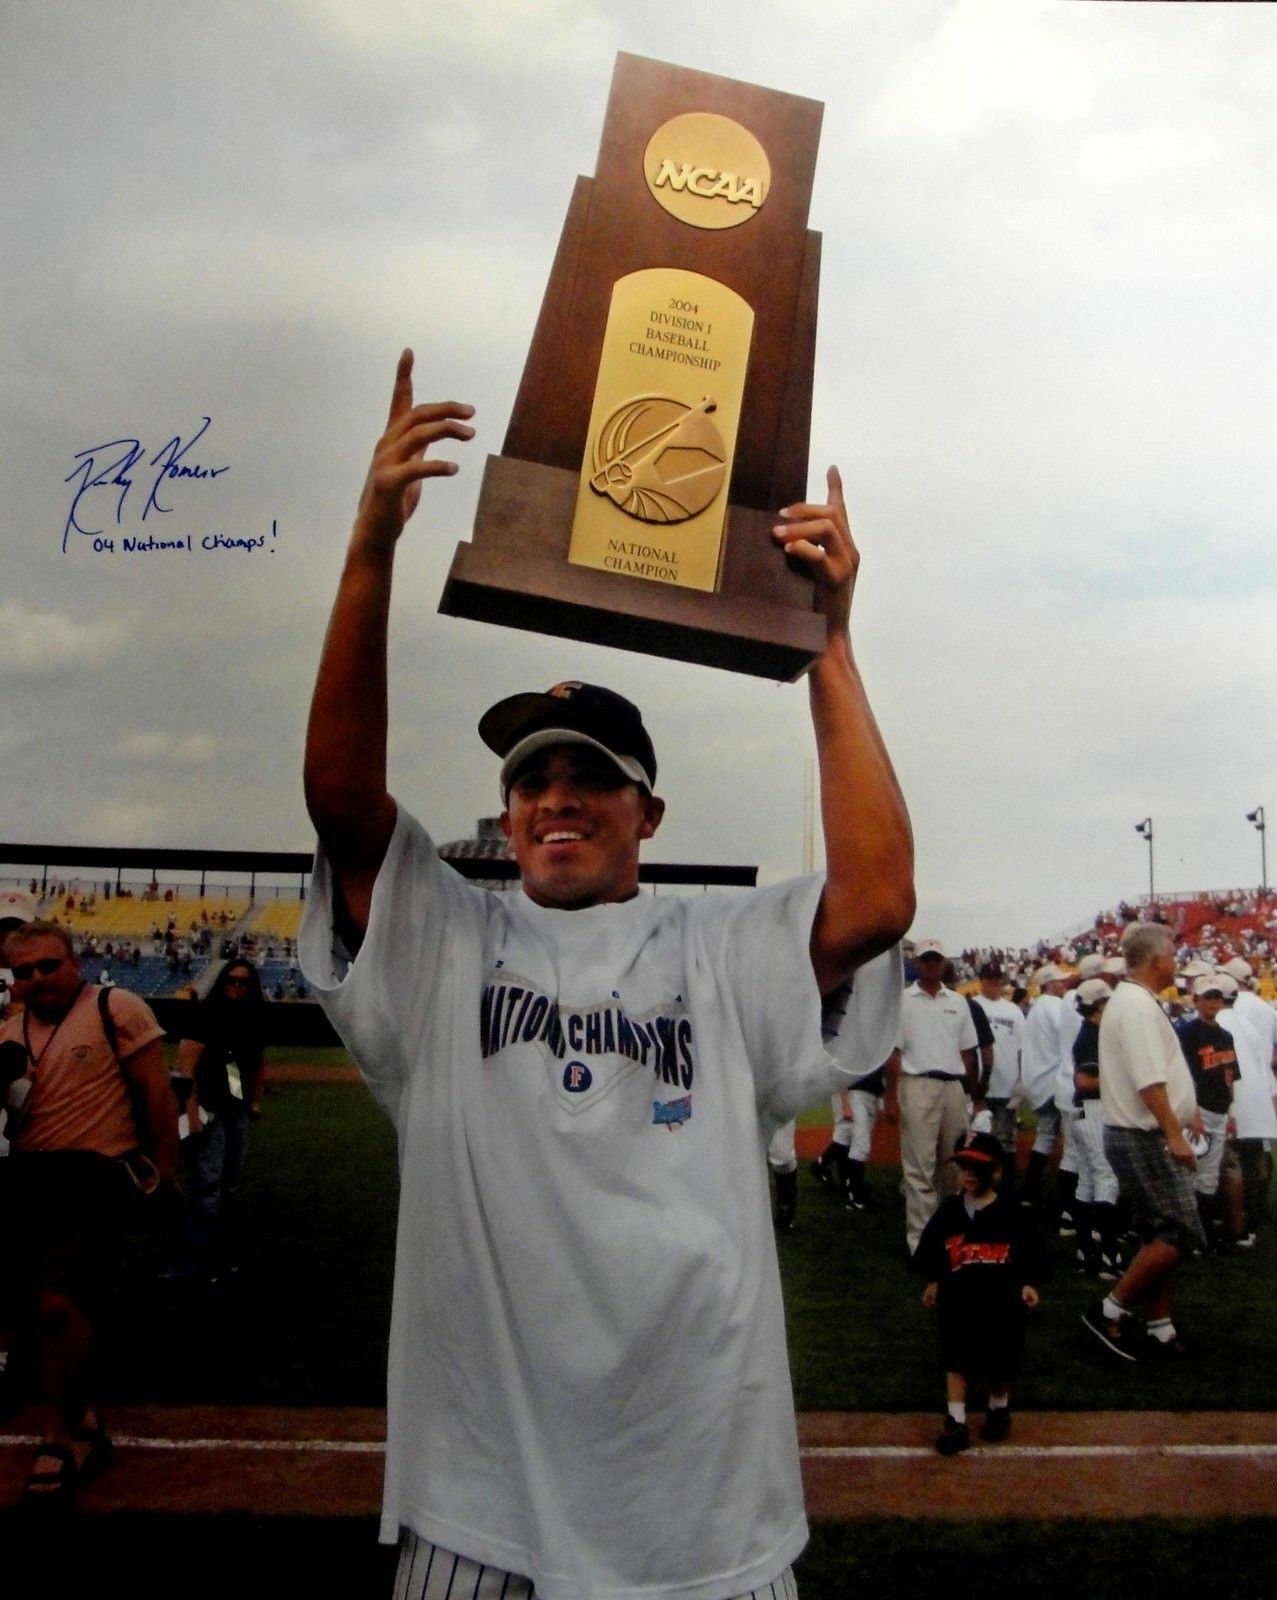 Ricky Romero Hand Signed Autographed 16x20 Photo Poster painting Holding Up trophy